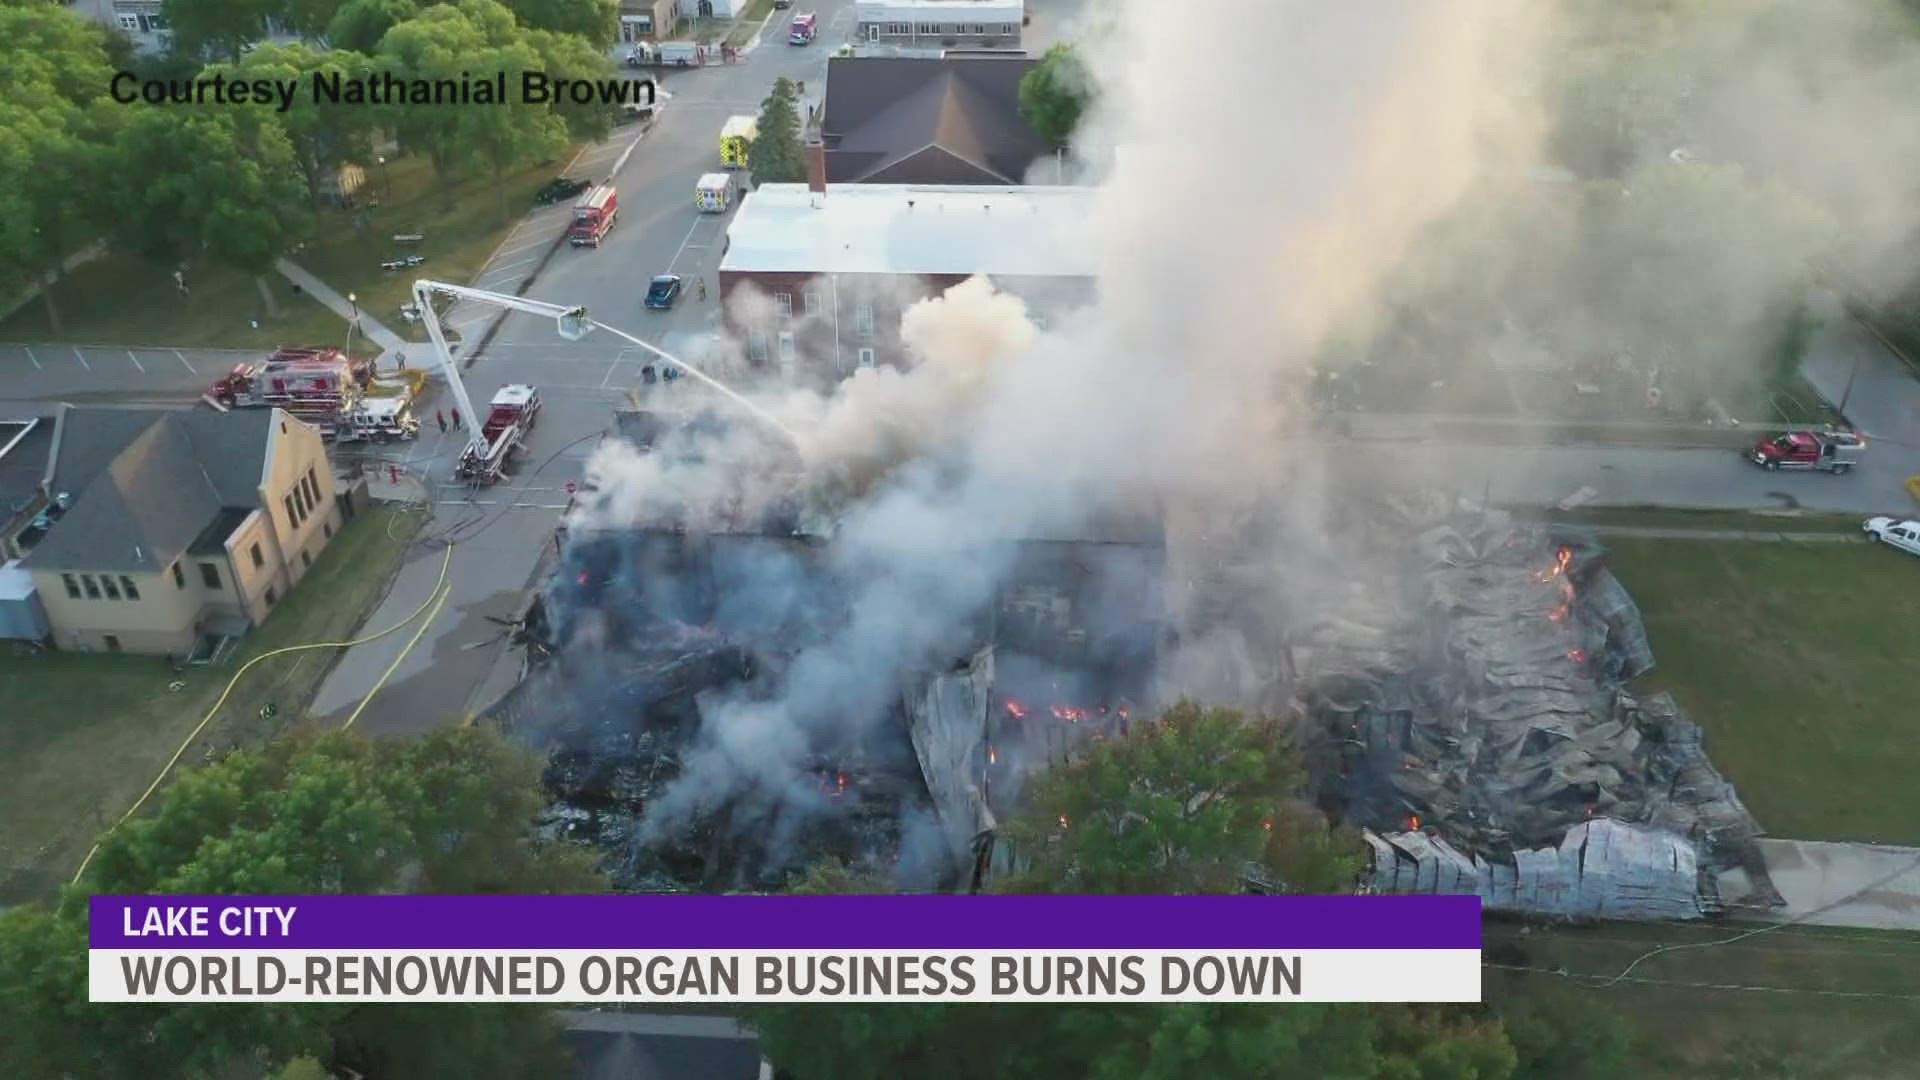 The building that housed Dobson Pipe Organ Builders looks to be a total loss.